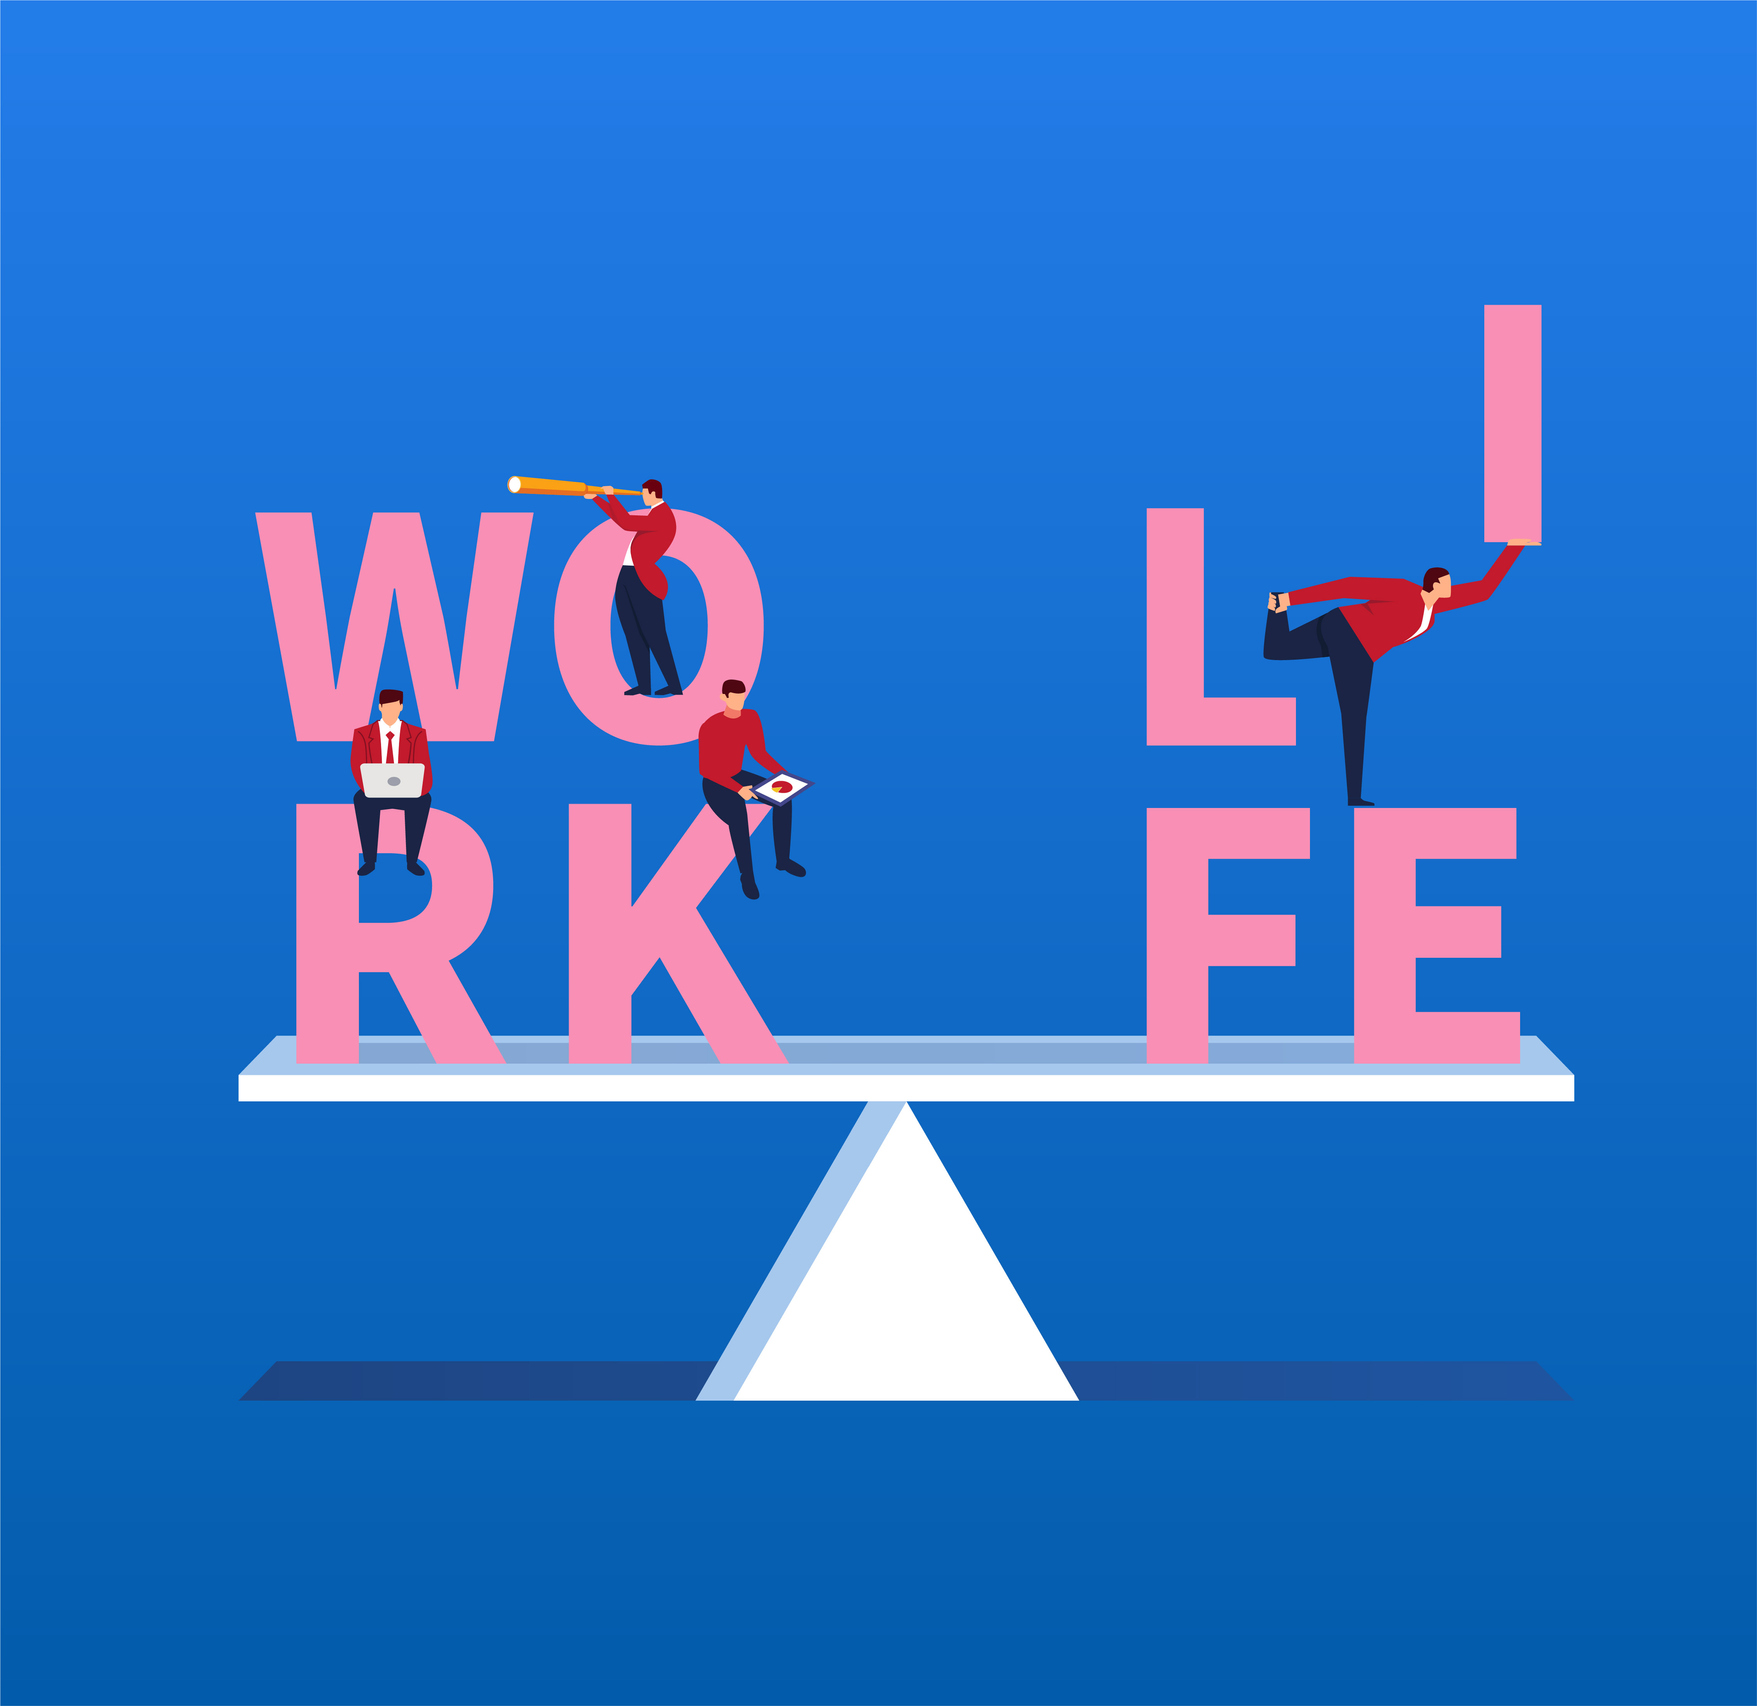 10 Steps to Achieving Work-Life Balance